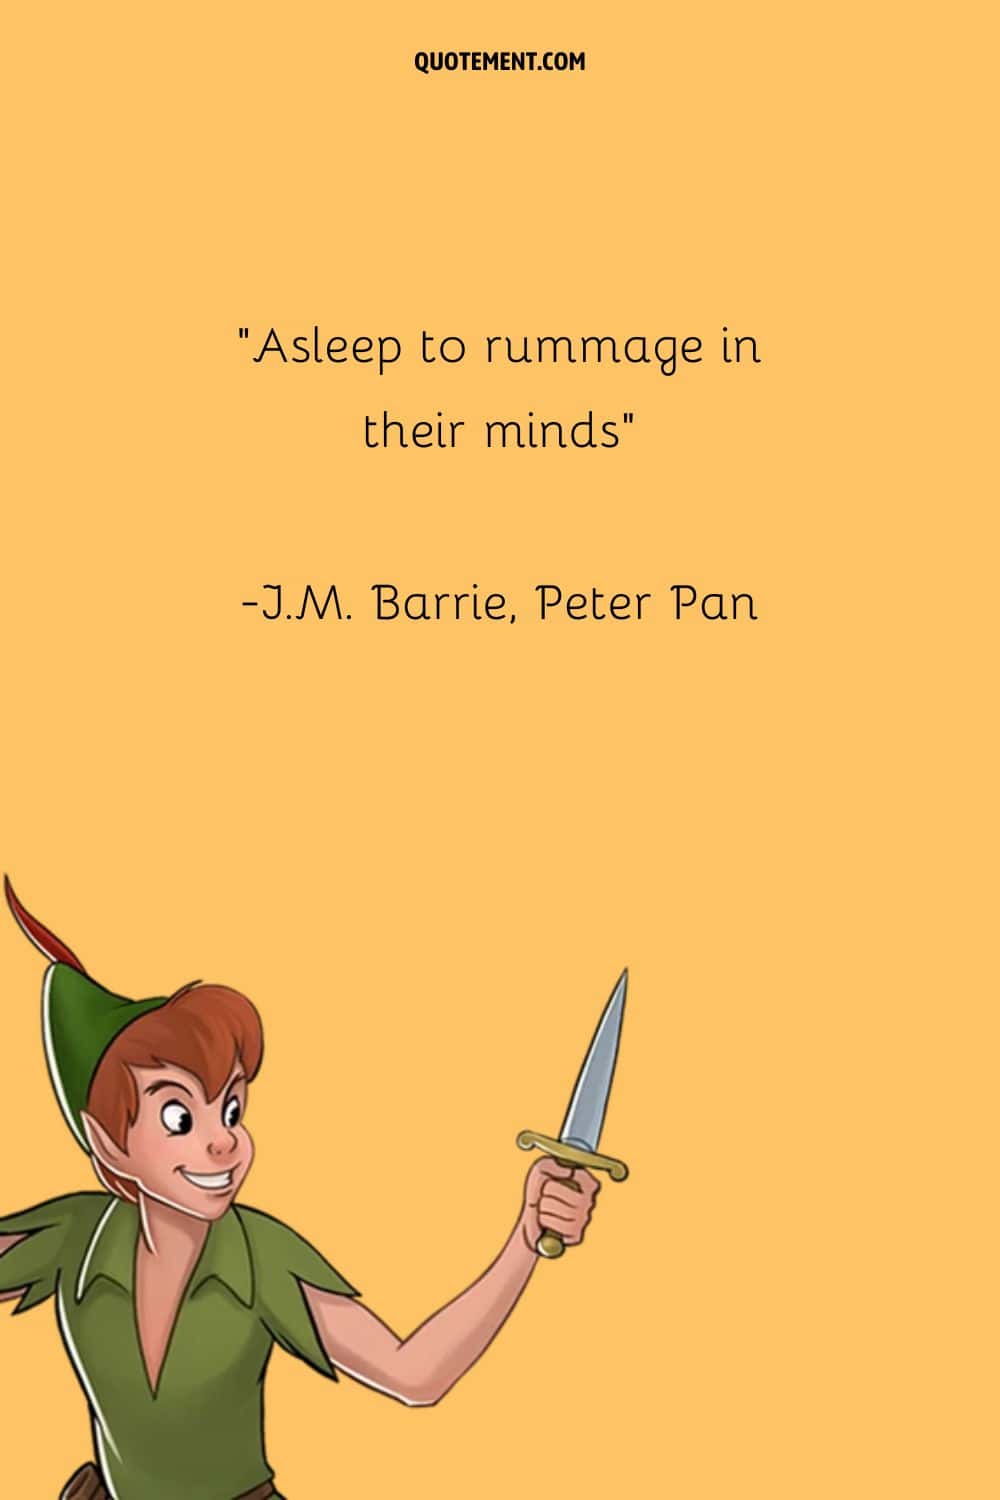 “Asleep to rummage in their minds” ― J.M. Barrie, Peter Pan and Wendy